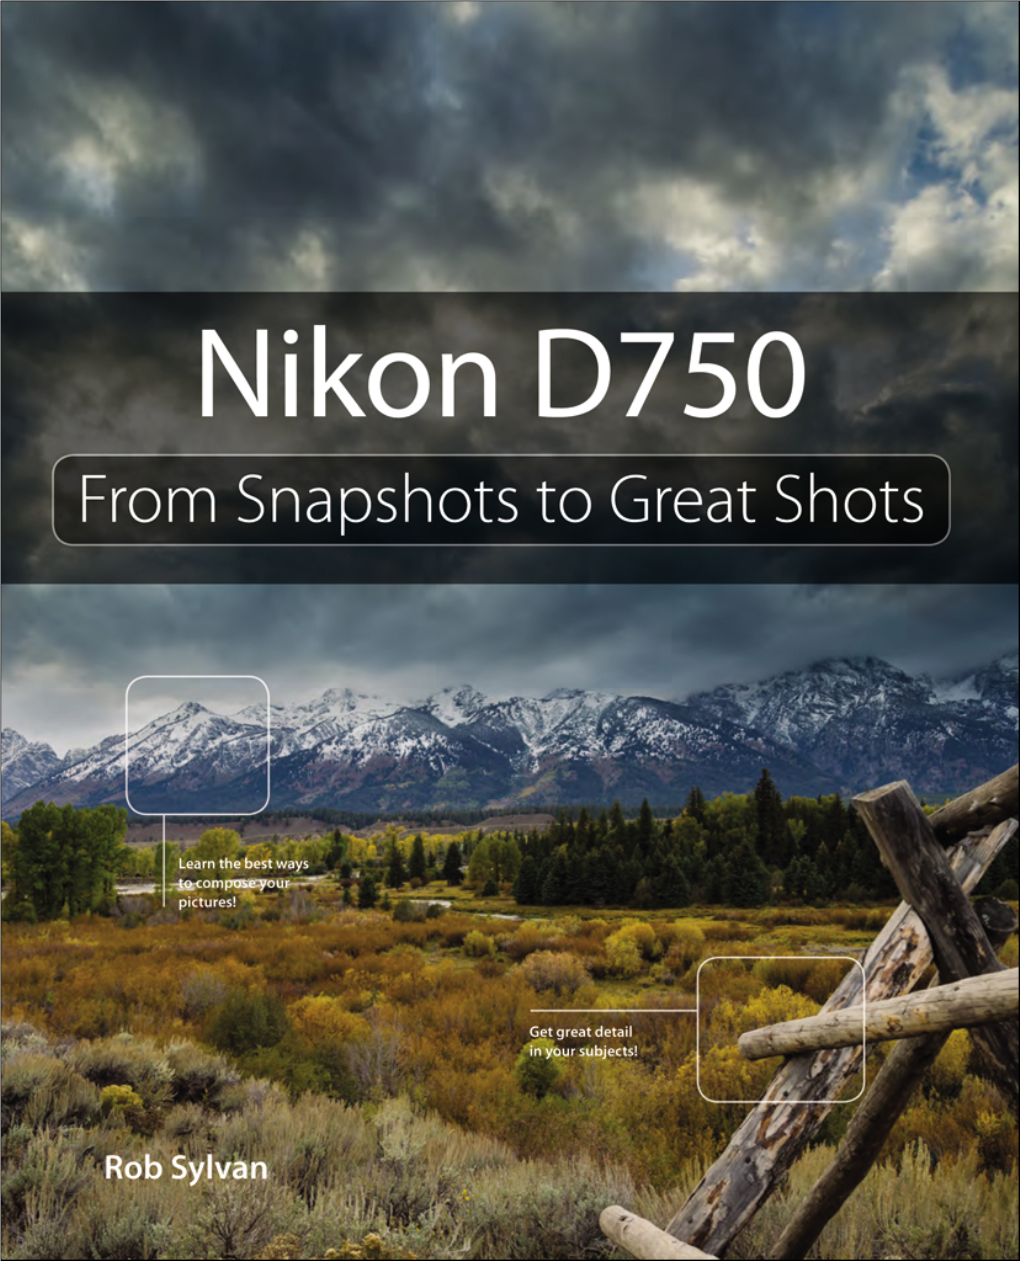 Nikon D750 from Snapshots to Great Shots